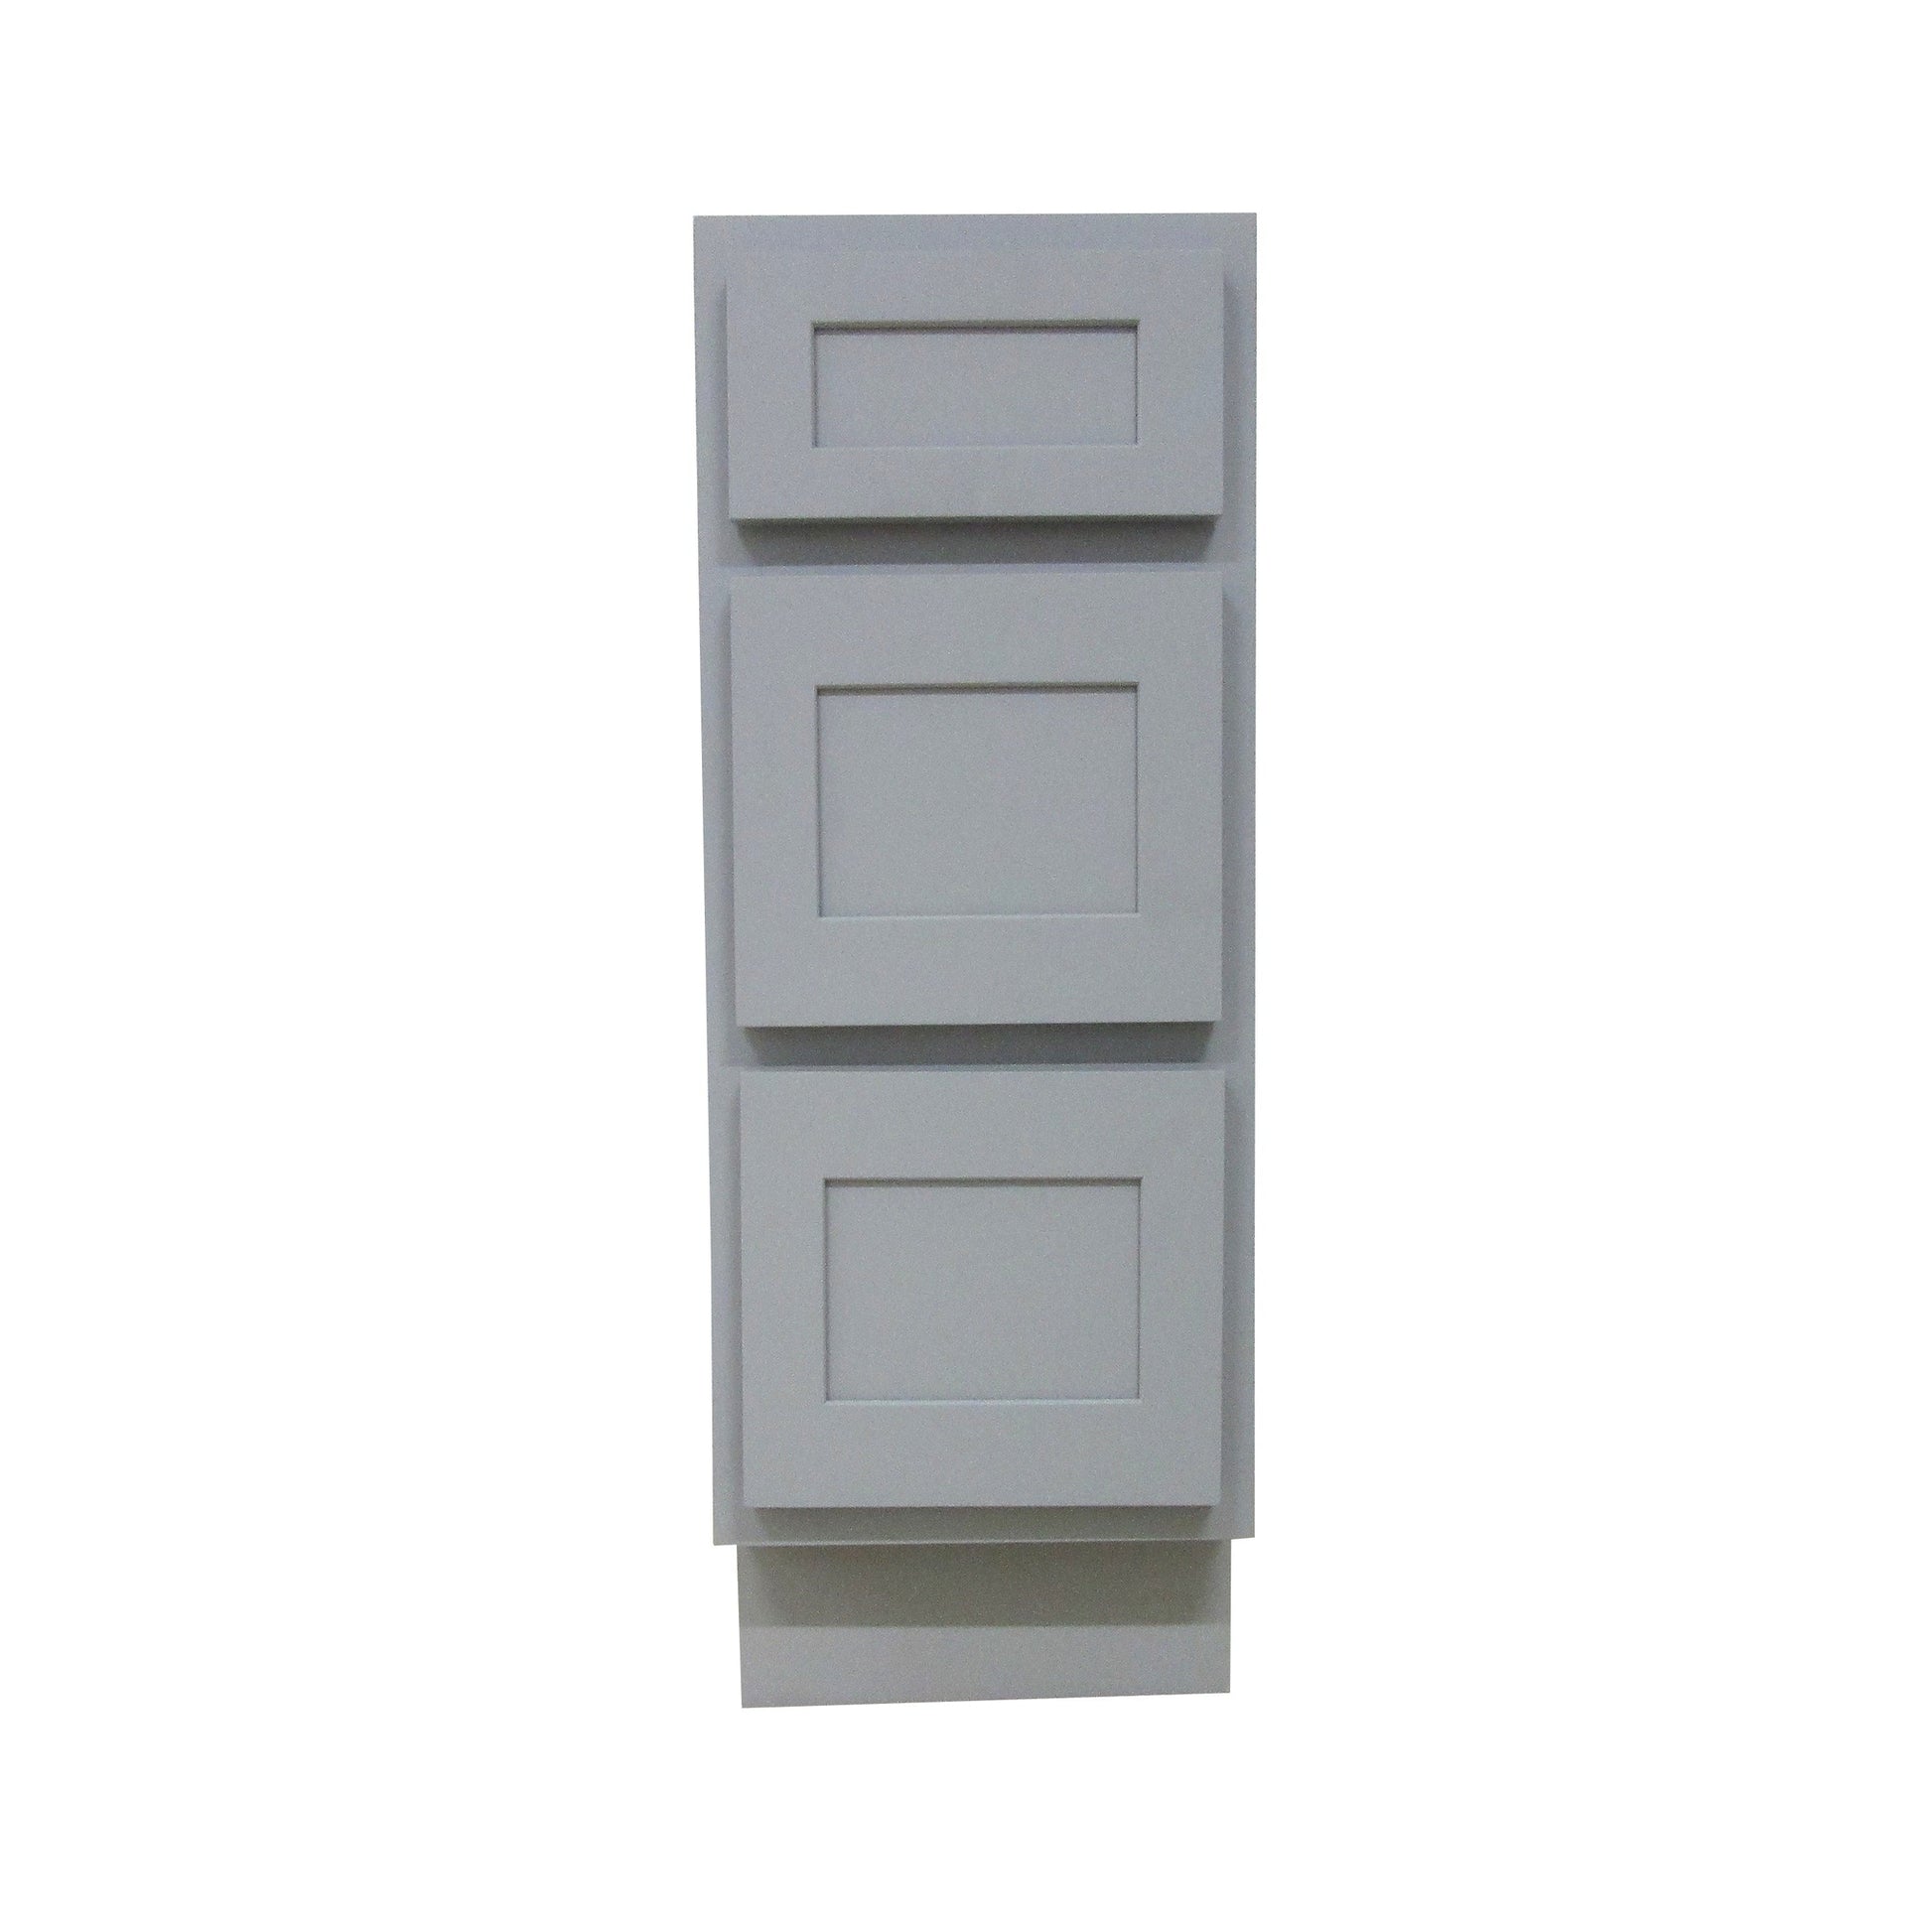 Vanity Art 12" Gray Single Freestanding Solid Wood Vanity Cabinet With 3 Soft Closing Drawers